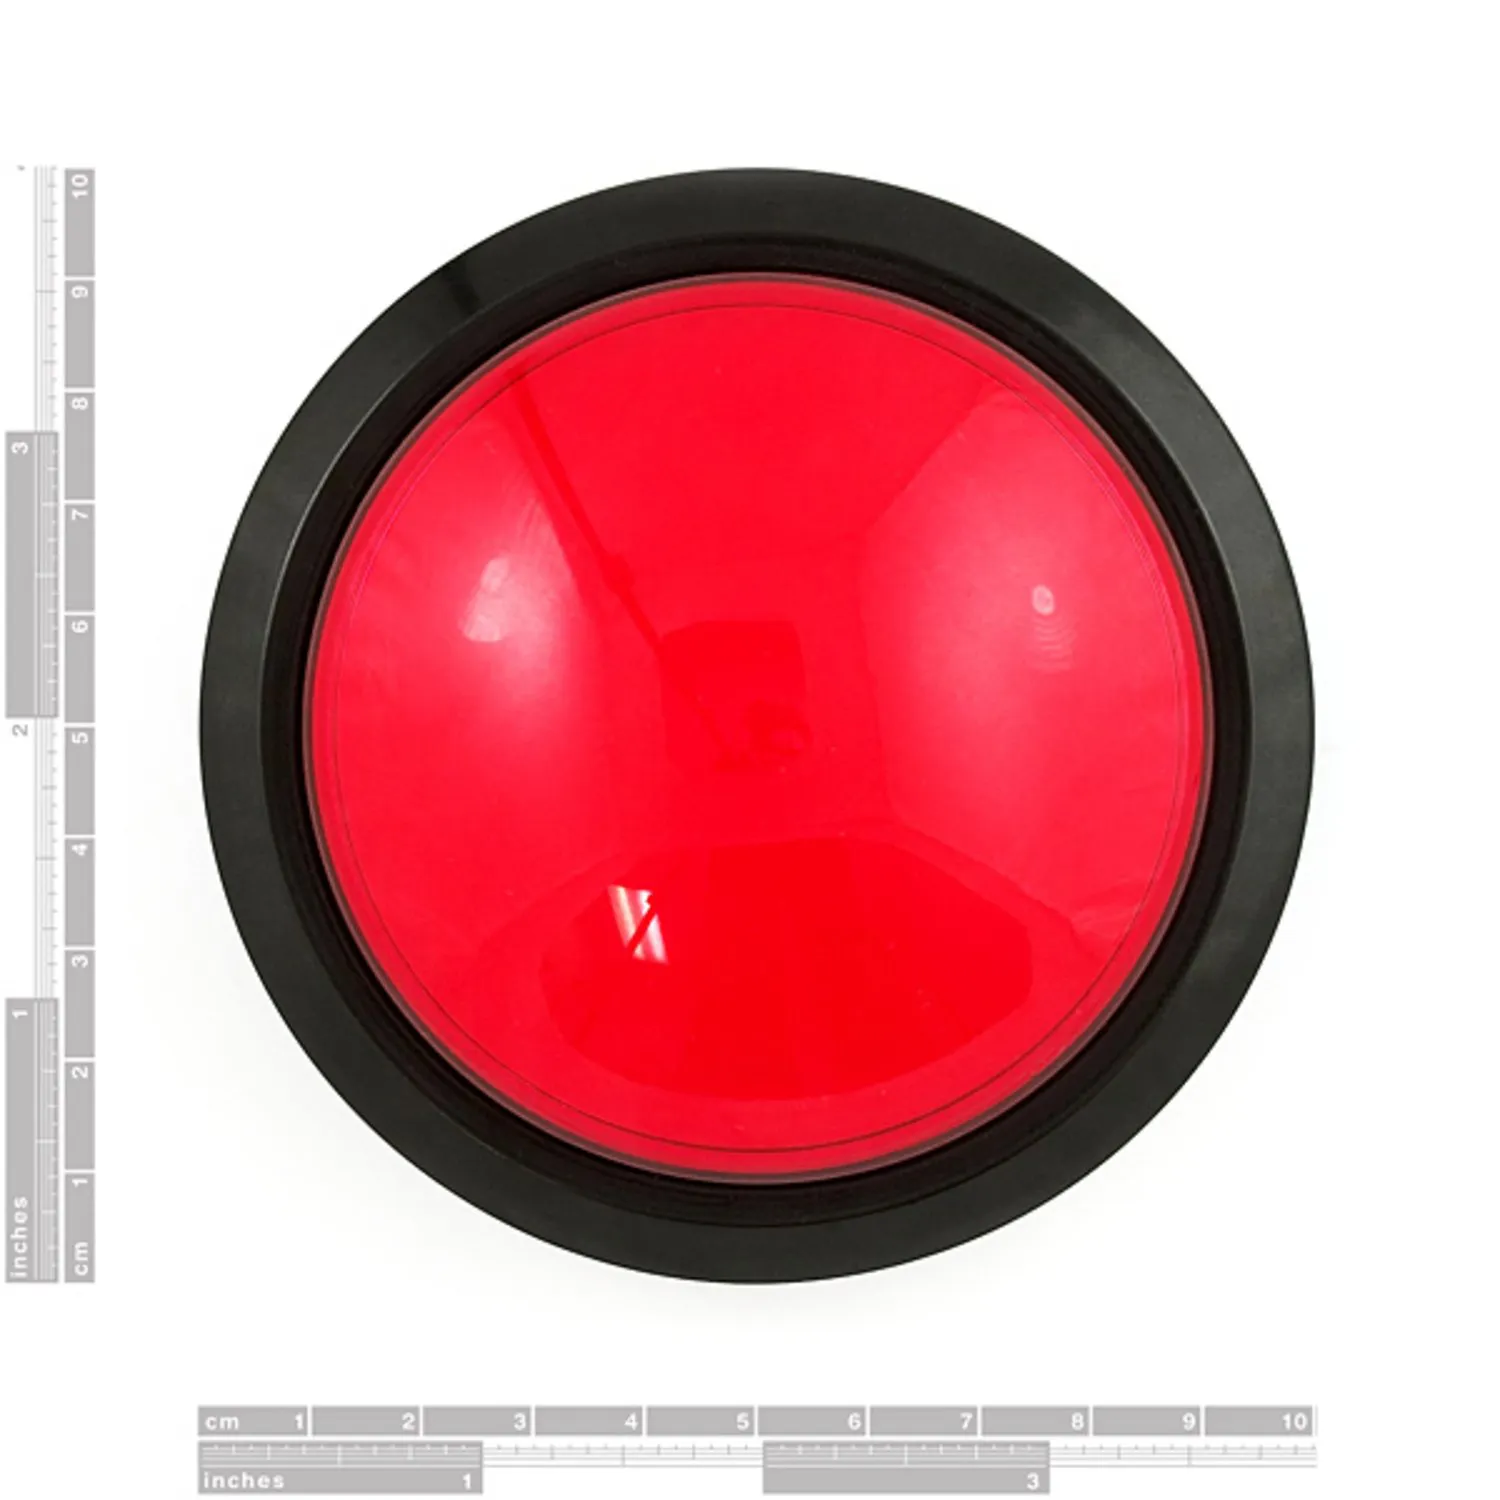 Photo of Big Dome Pushbutton - Red